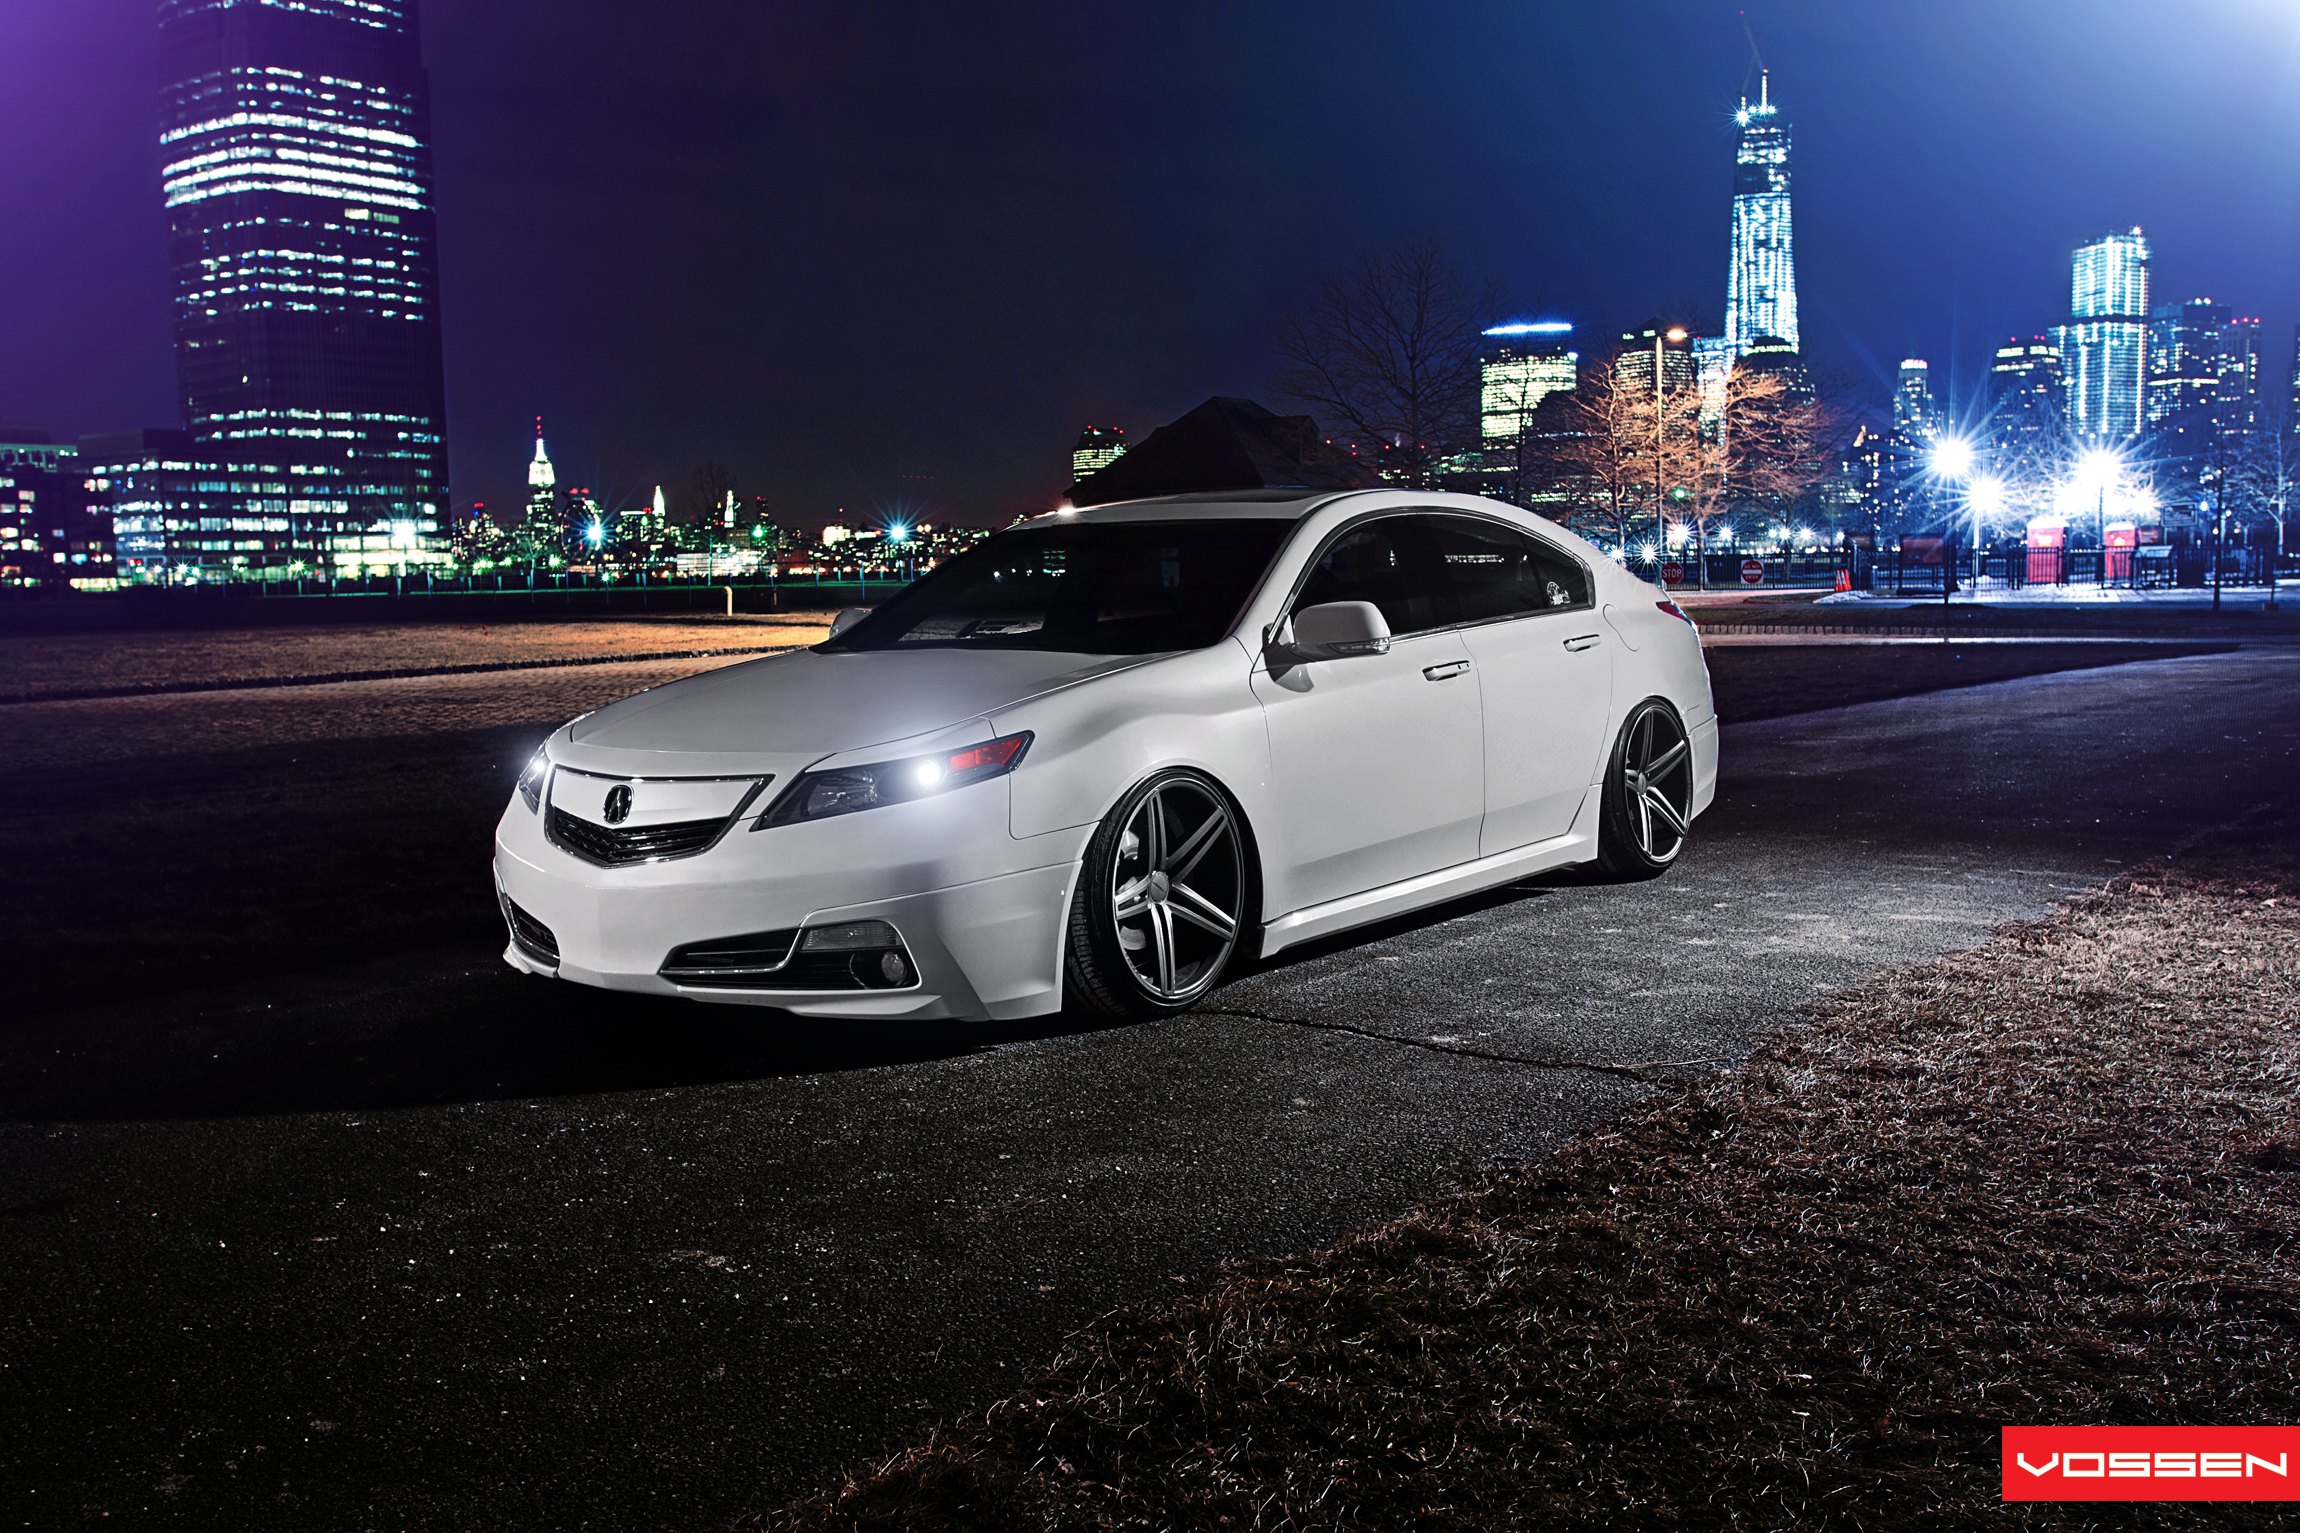 White Acura TL with Custom Headlights - Photo by Vossen